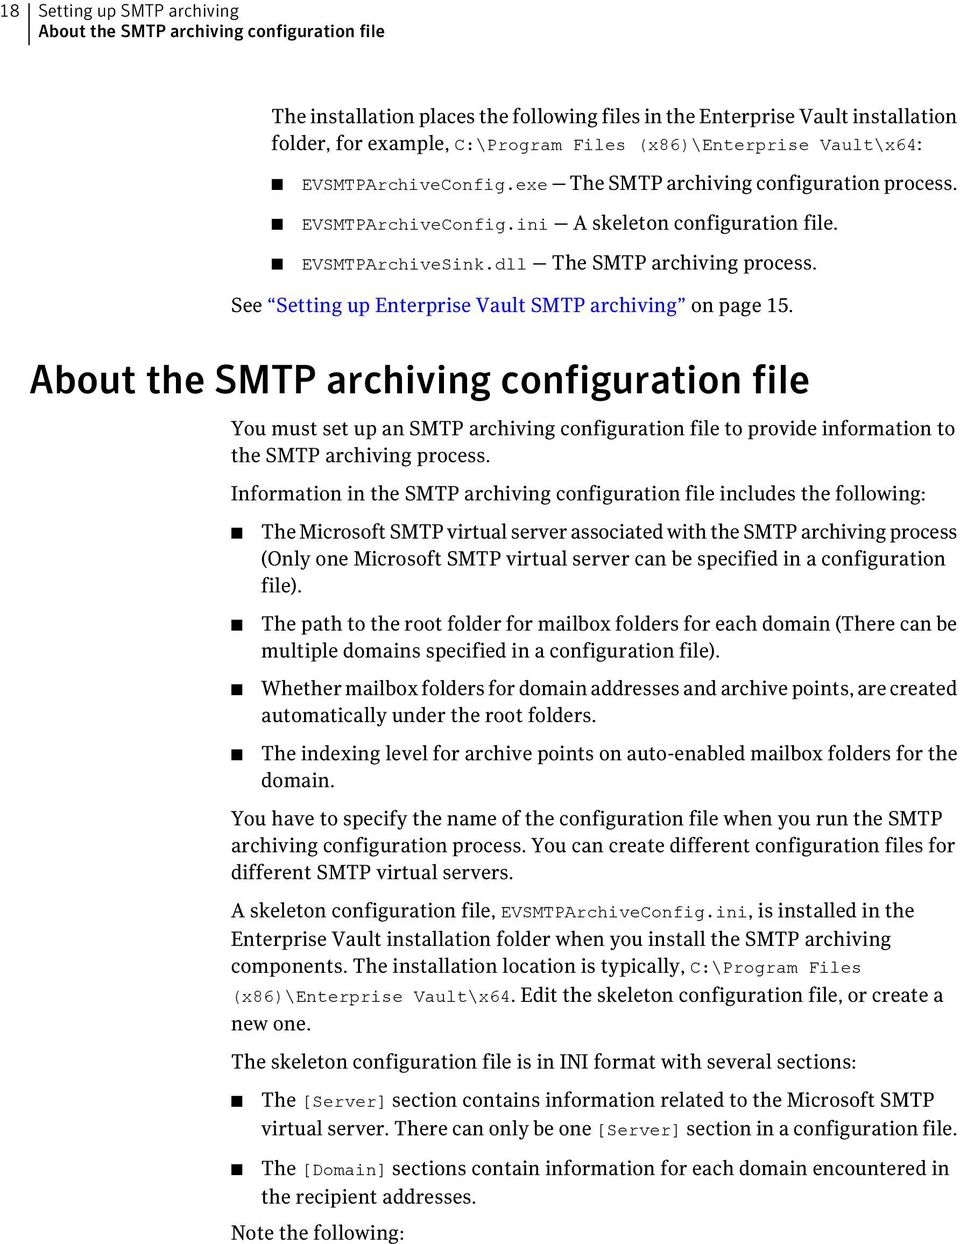 See Setting up Enterprise Vault SMTP archiving on page 15.